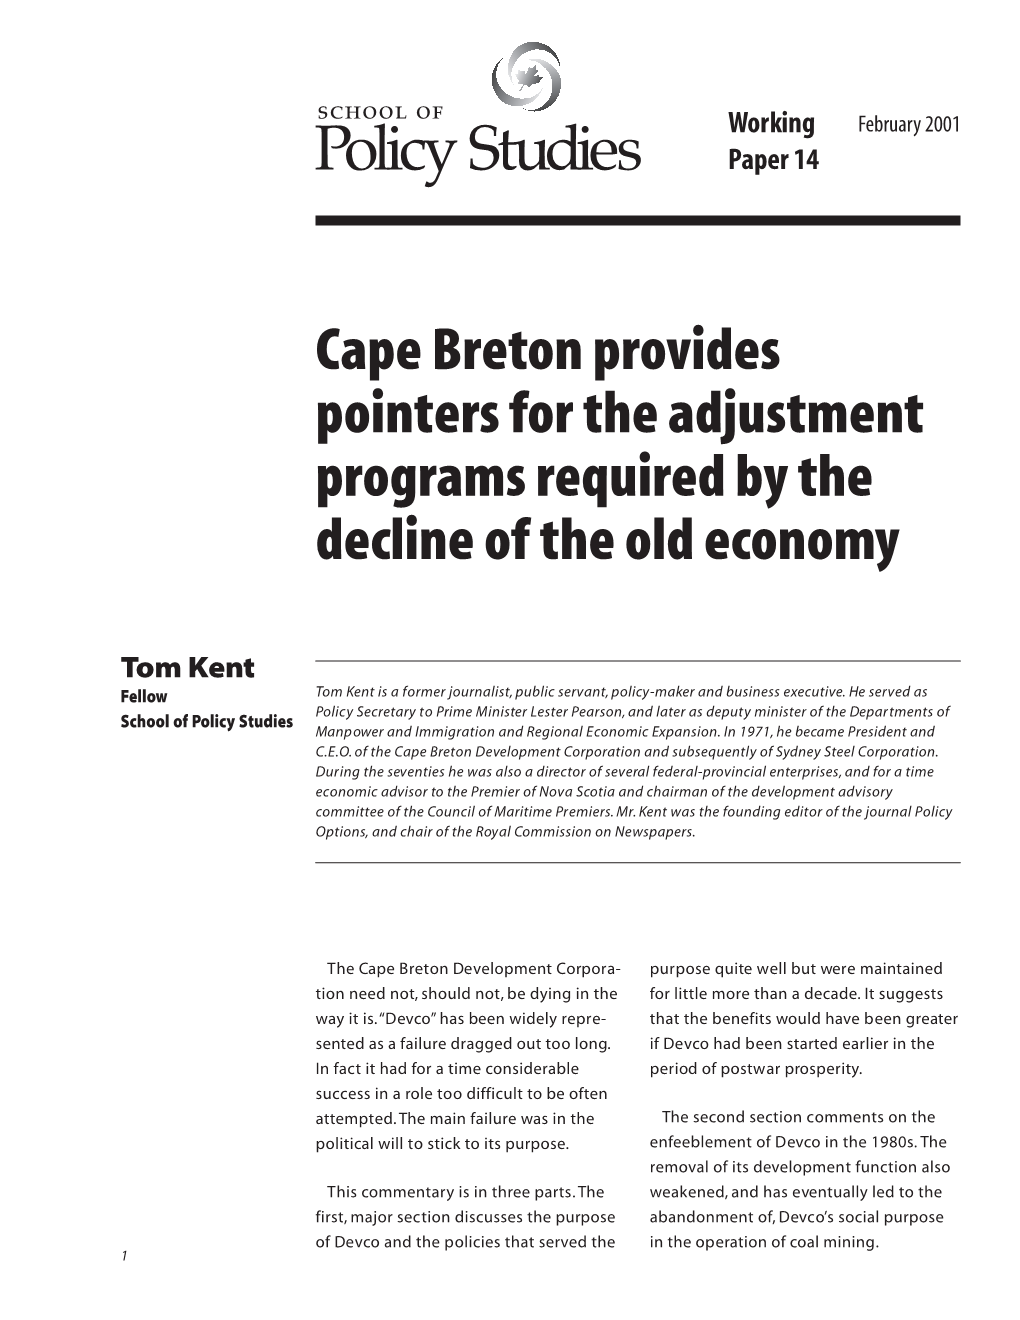 Cape Breton Provides Pointers for the Adjustment Programs Required by the Decline of the Old Economy